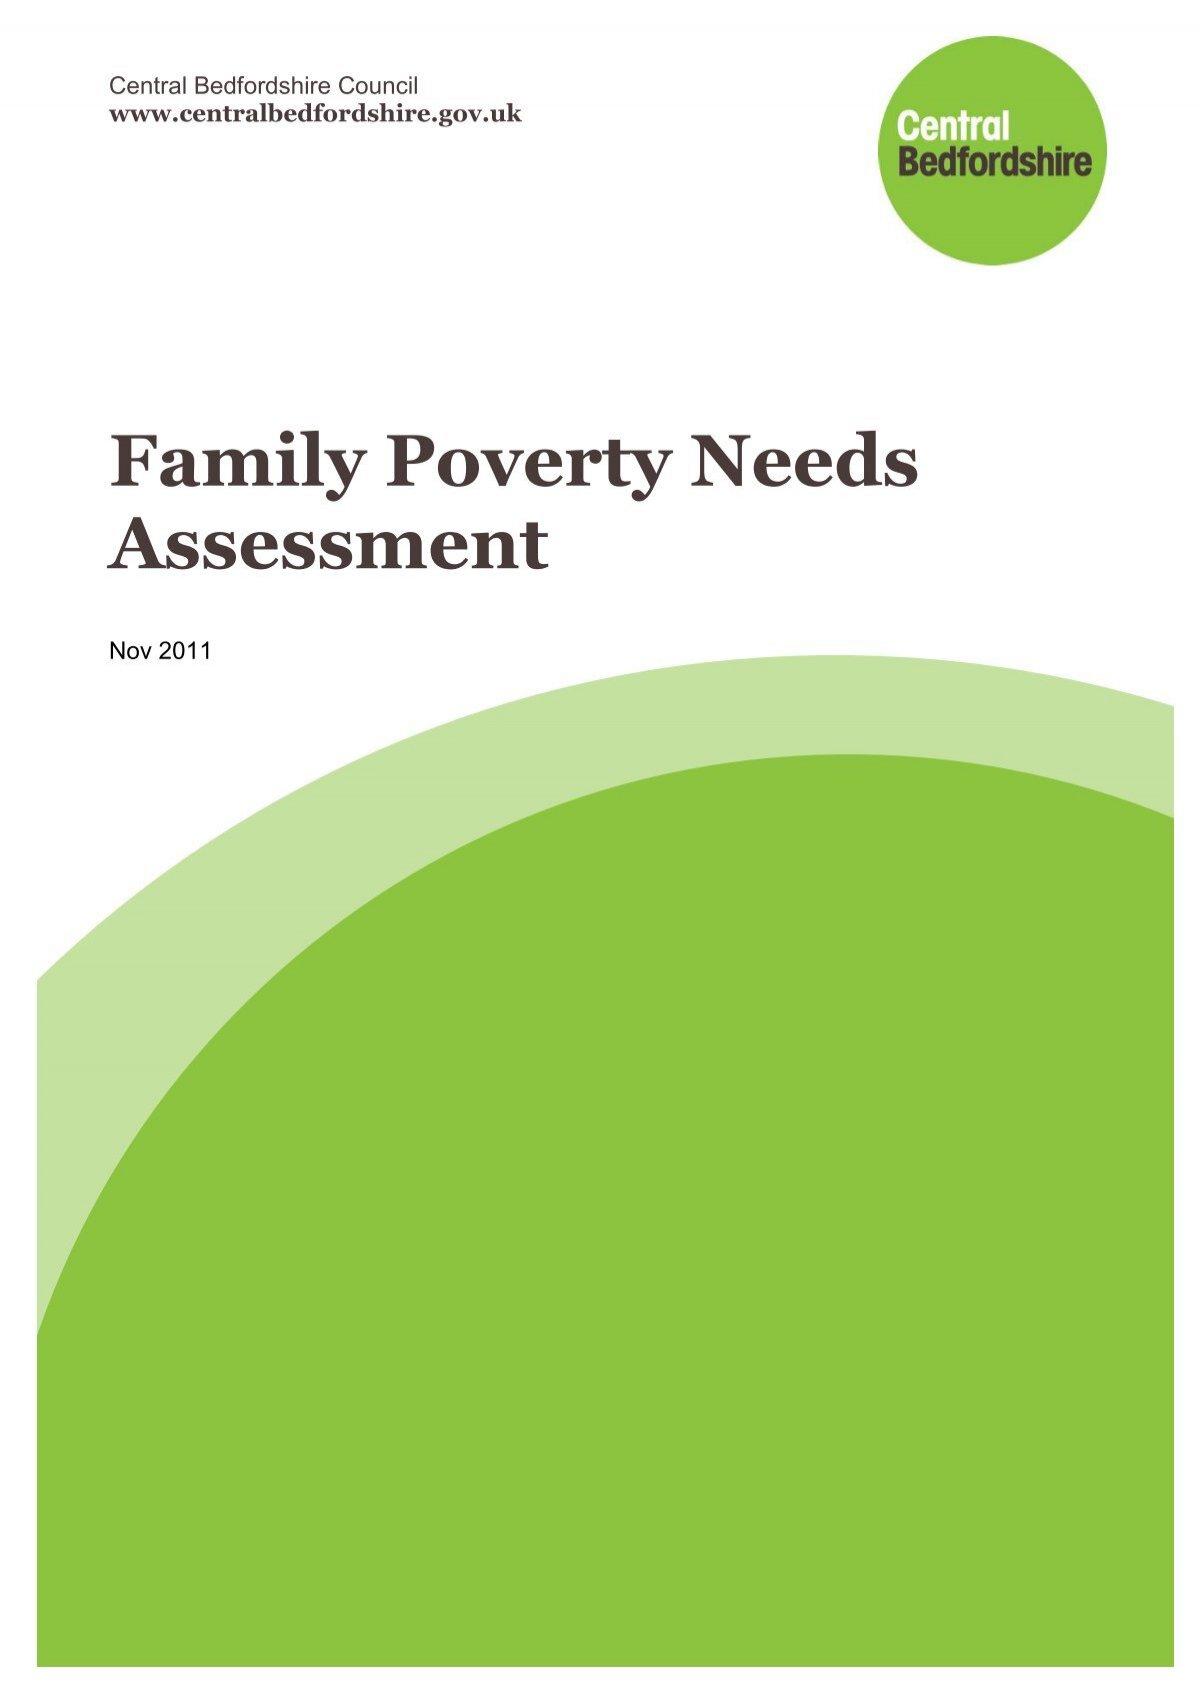 family-poverty-needs-assessment-central-bedfordshire-council